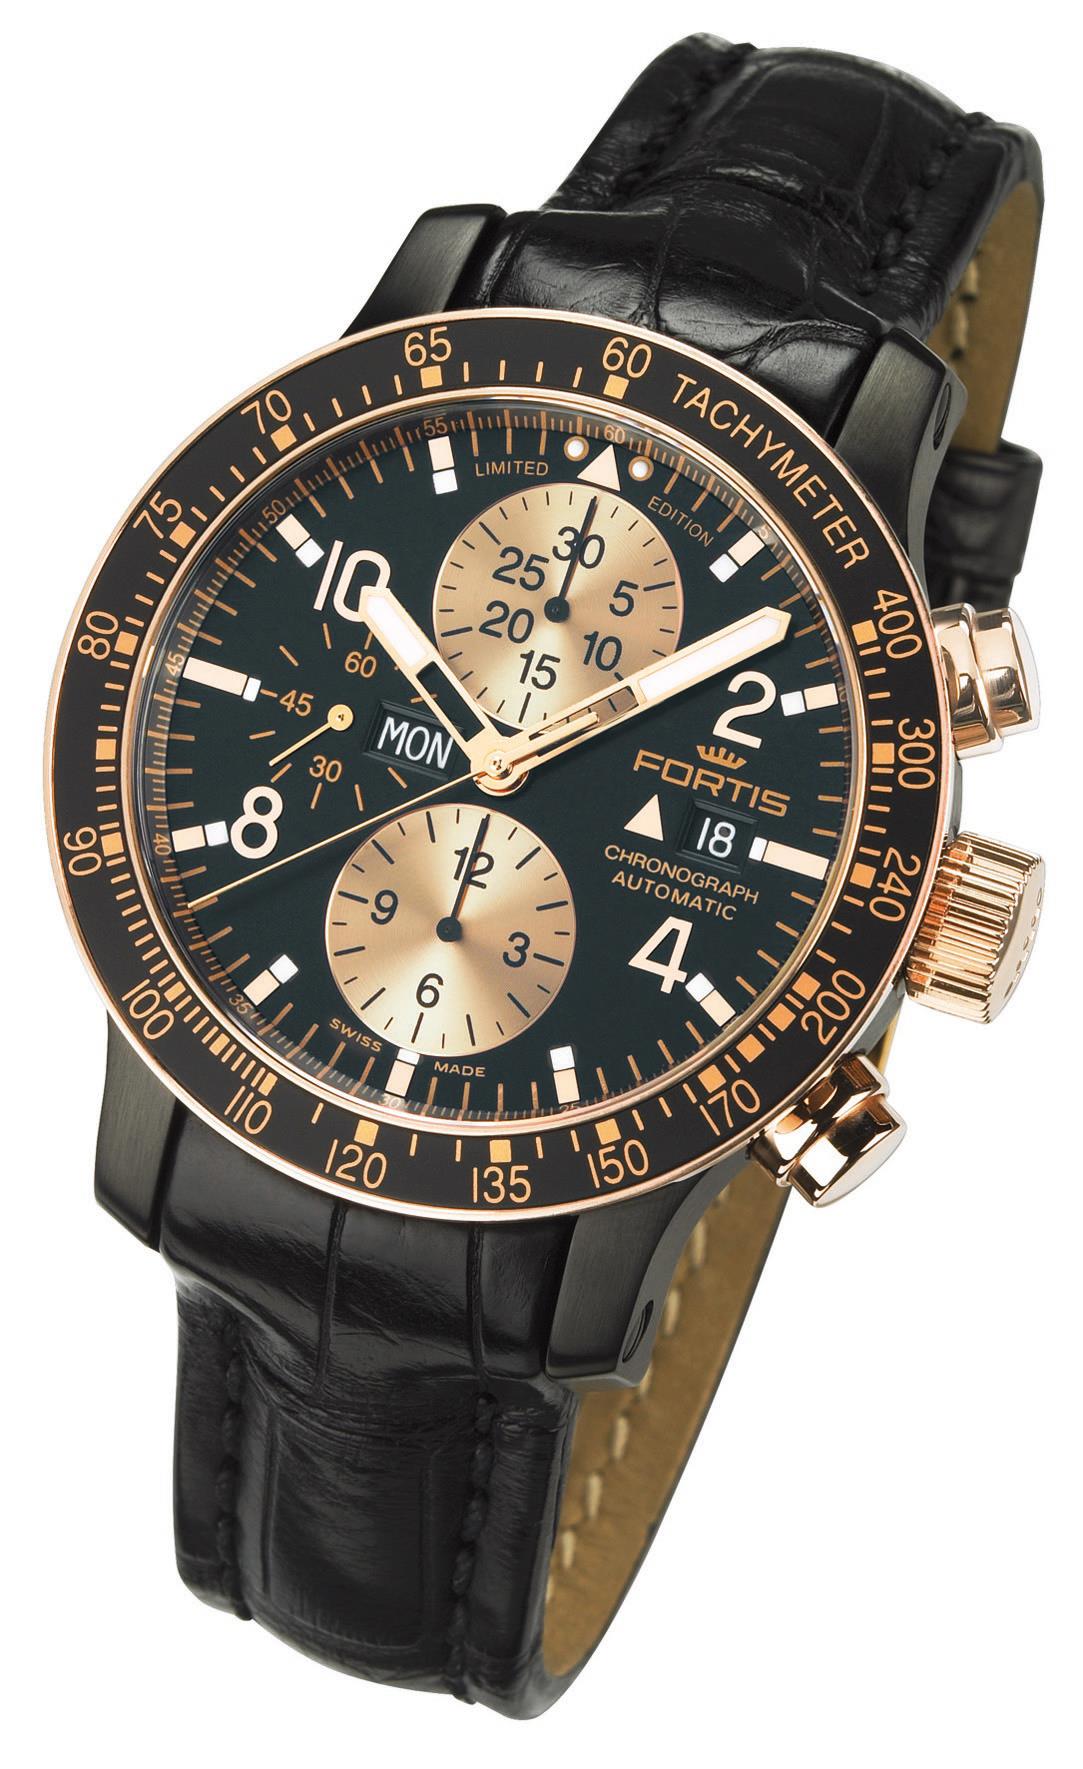 Fortis Mens 665.13.19 L.01 B-42 Stratoliner 100th Anniversary Limited Edition Black Dial Chronograph Watch